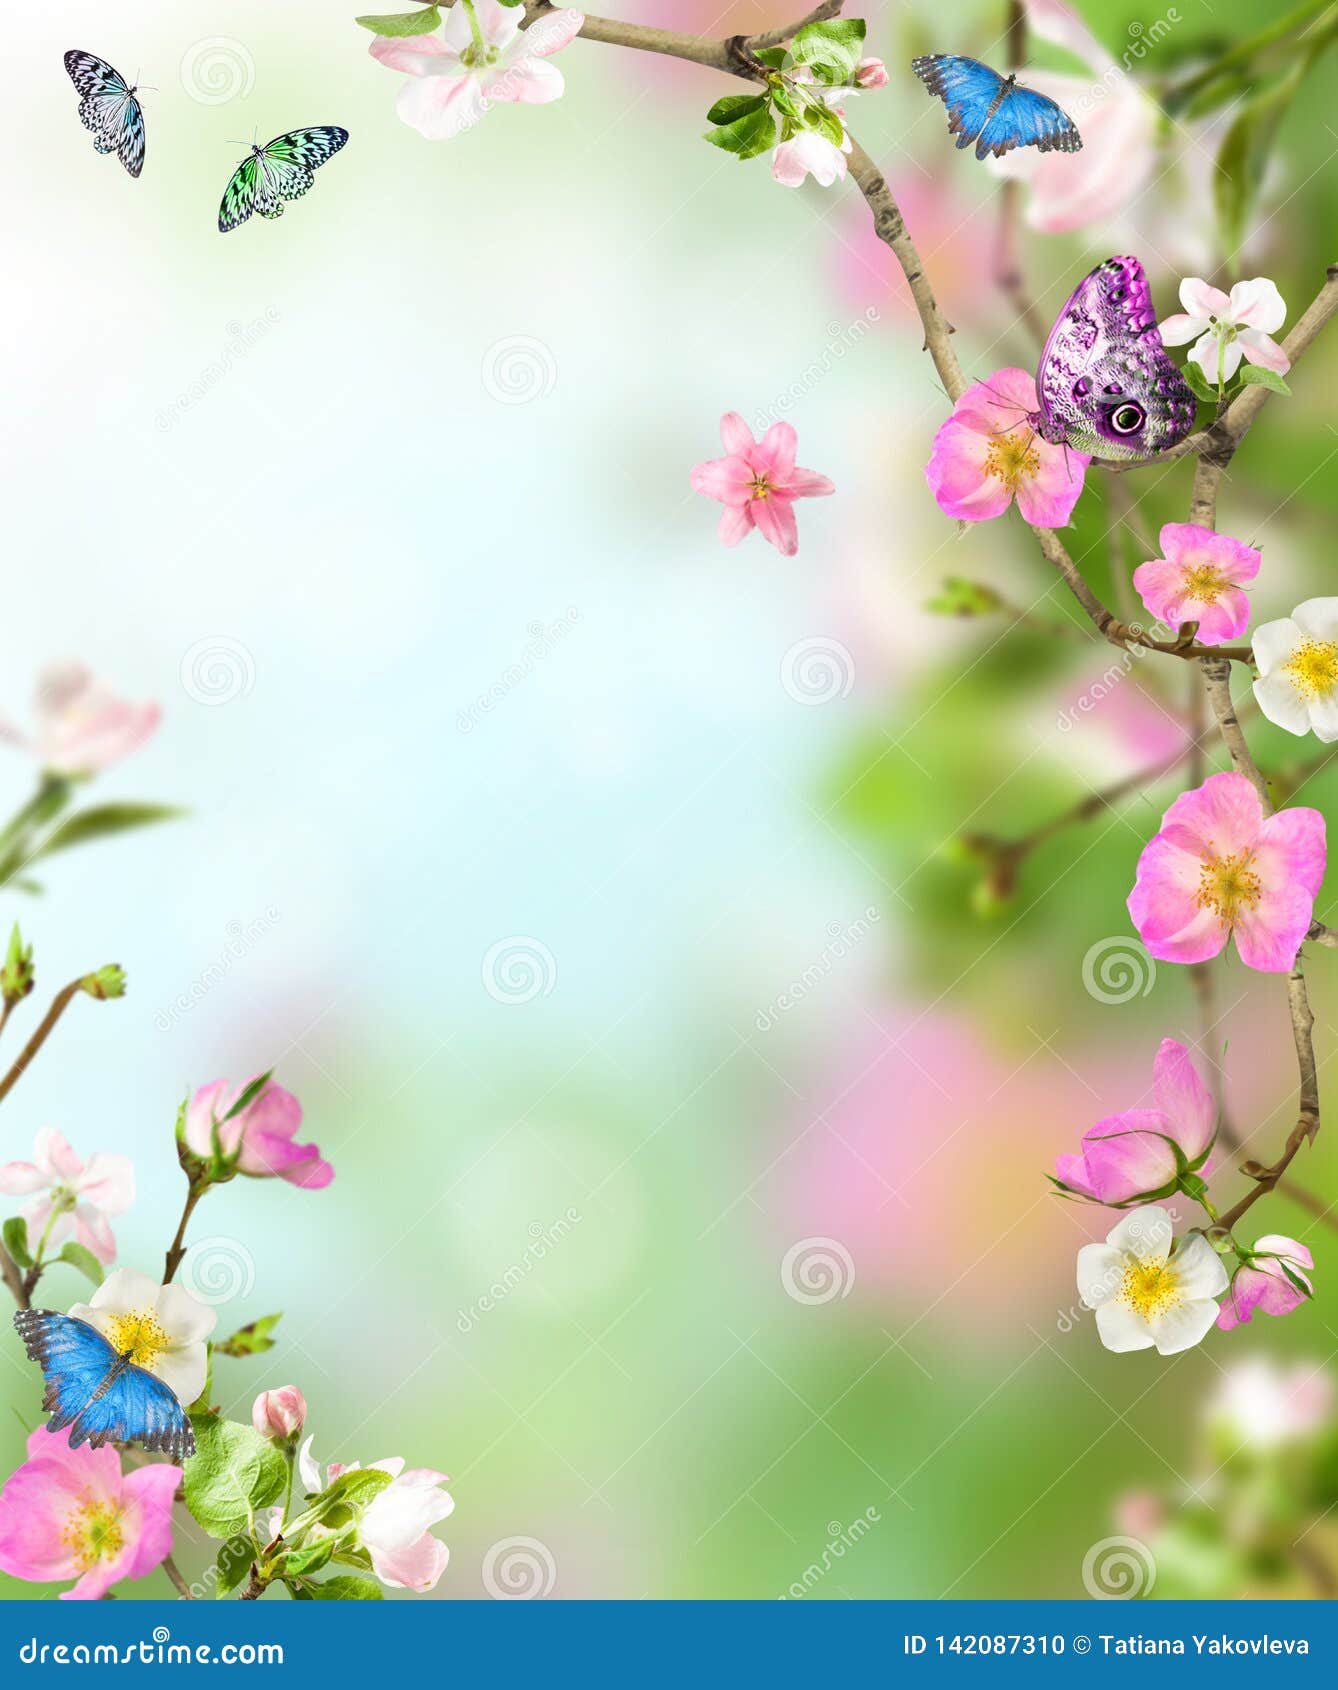 Background Nature with Flowers and Butterflies Stock Photo - Image of  green, environment: 142087310